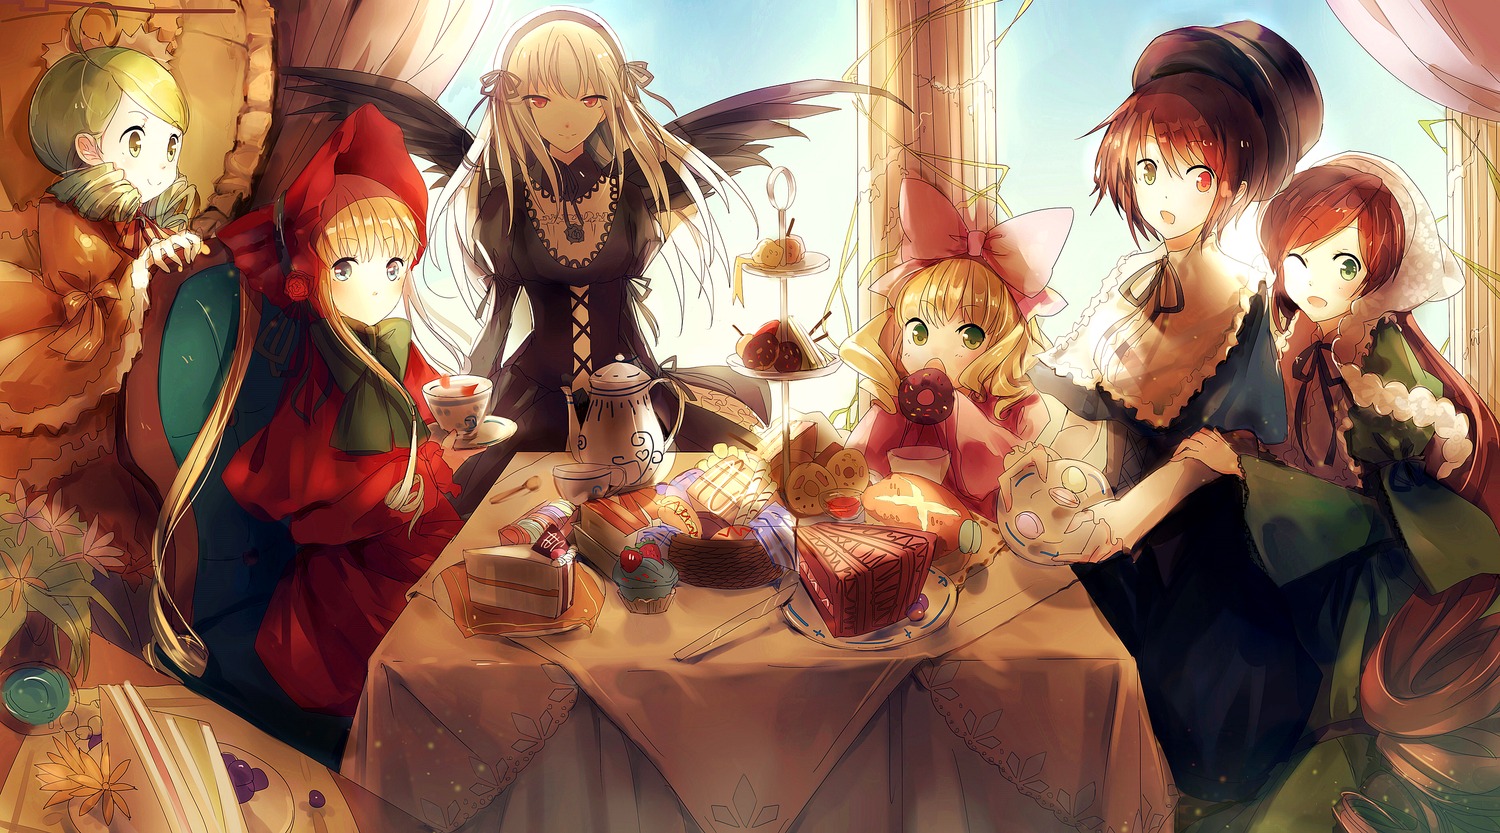 6+girls benghuai_7 blonde_hair blue_eyes bonnet bow bread brown_hair cake chair commentary_request cup cupcake curtains doughnut dress drill_hair flower food gothic_lolita green_eyes green_hair hairband hat heterochromia highres hina_ichigo image kanaria knife lolita_fashion long_hair multiple multiple_girls one_eye_closed open_mouth parasol pink_bow rozen_maiden sandwich shinku short_hair siblings silver_hair sitting sky smile souseiseki standing suigintou suiseiseki table tagme teacup teapot tiered_tray twins twintails umbrella window wings yellow_eyes